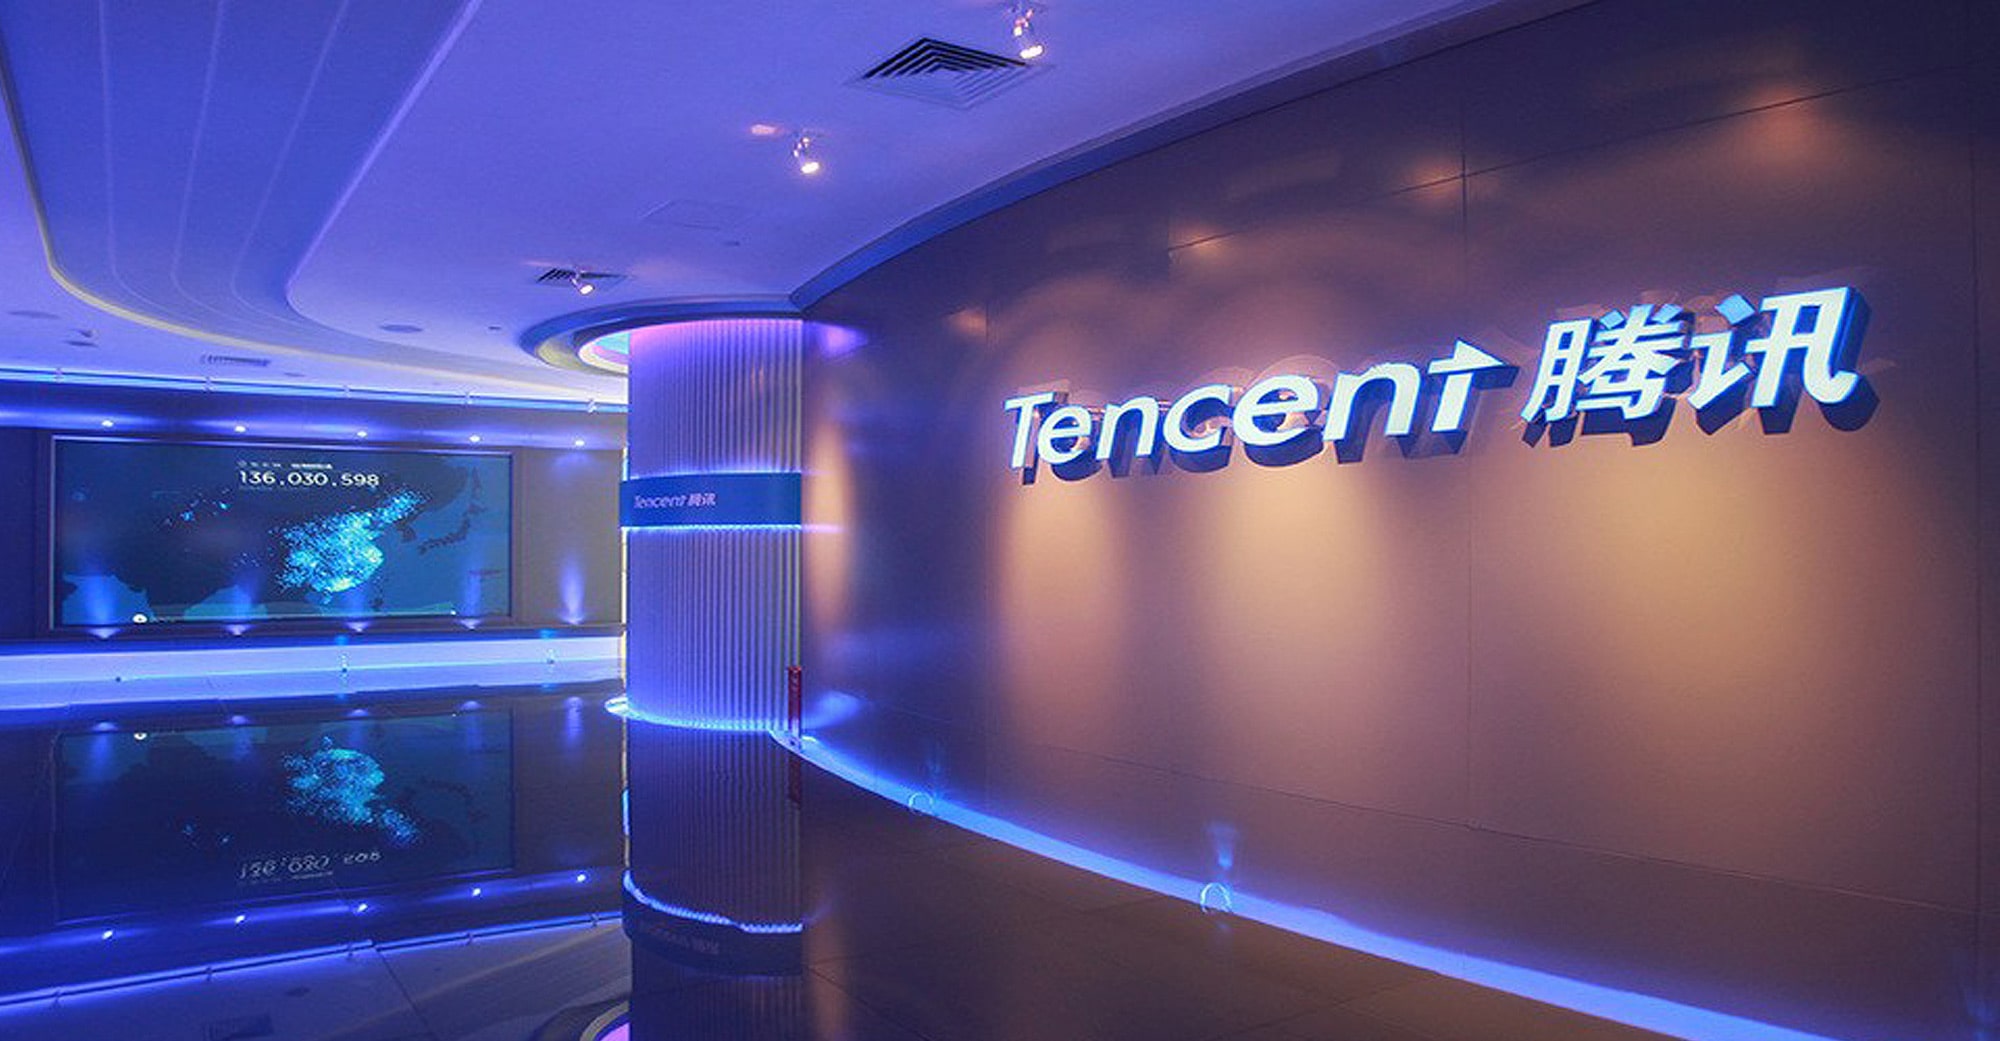 Tencent is the 5th biggest company in the world